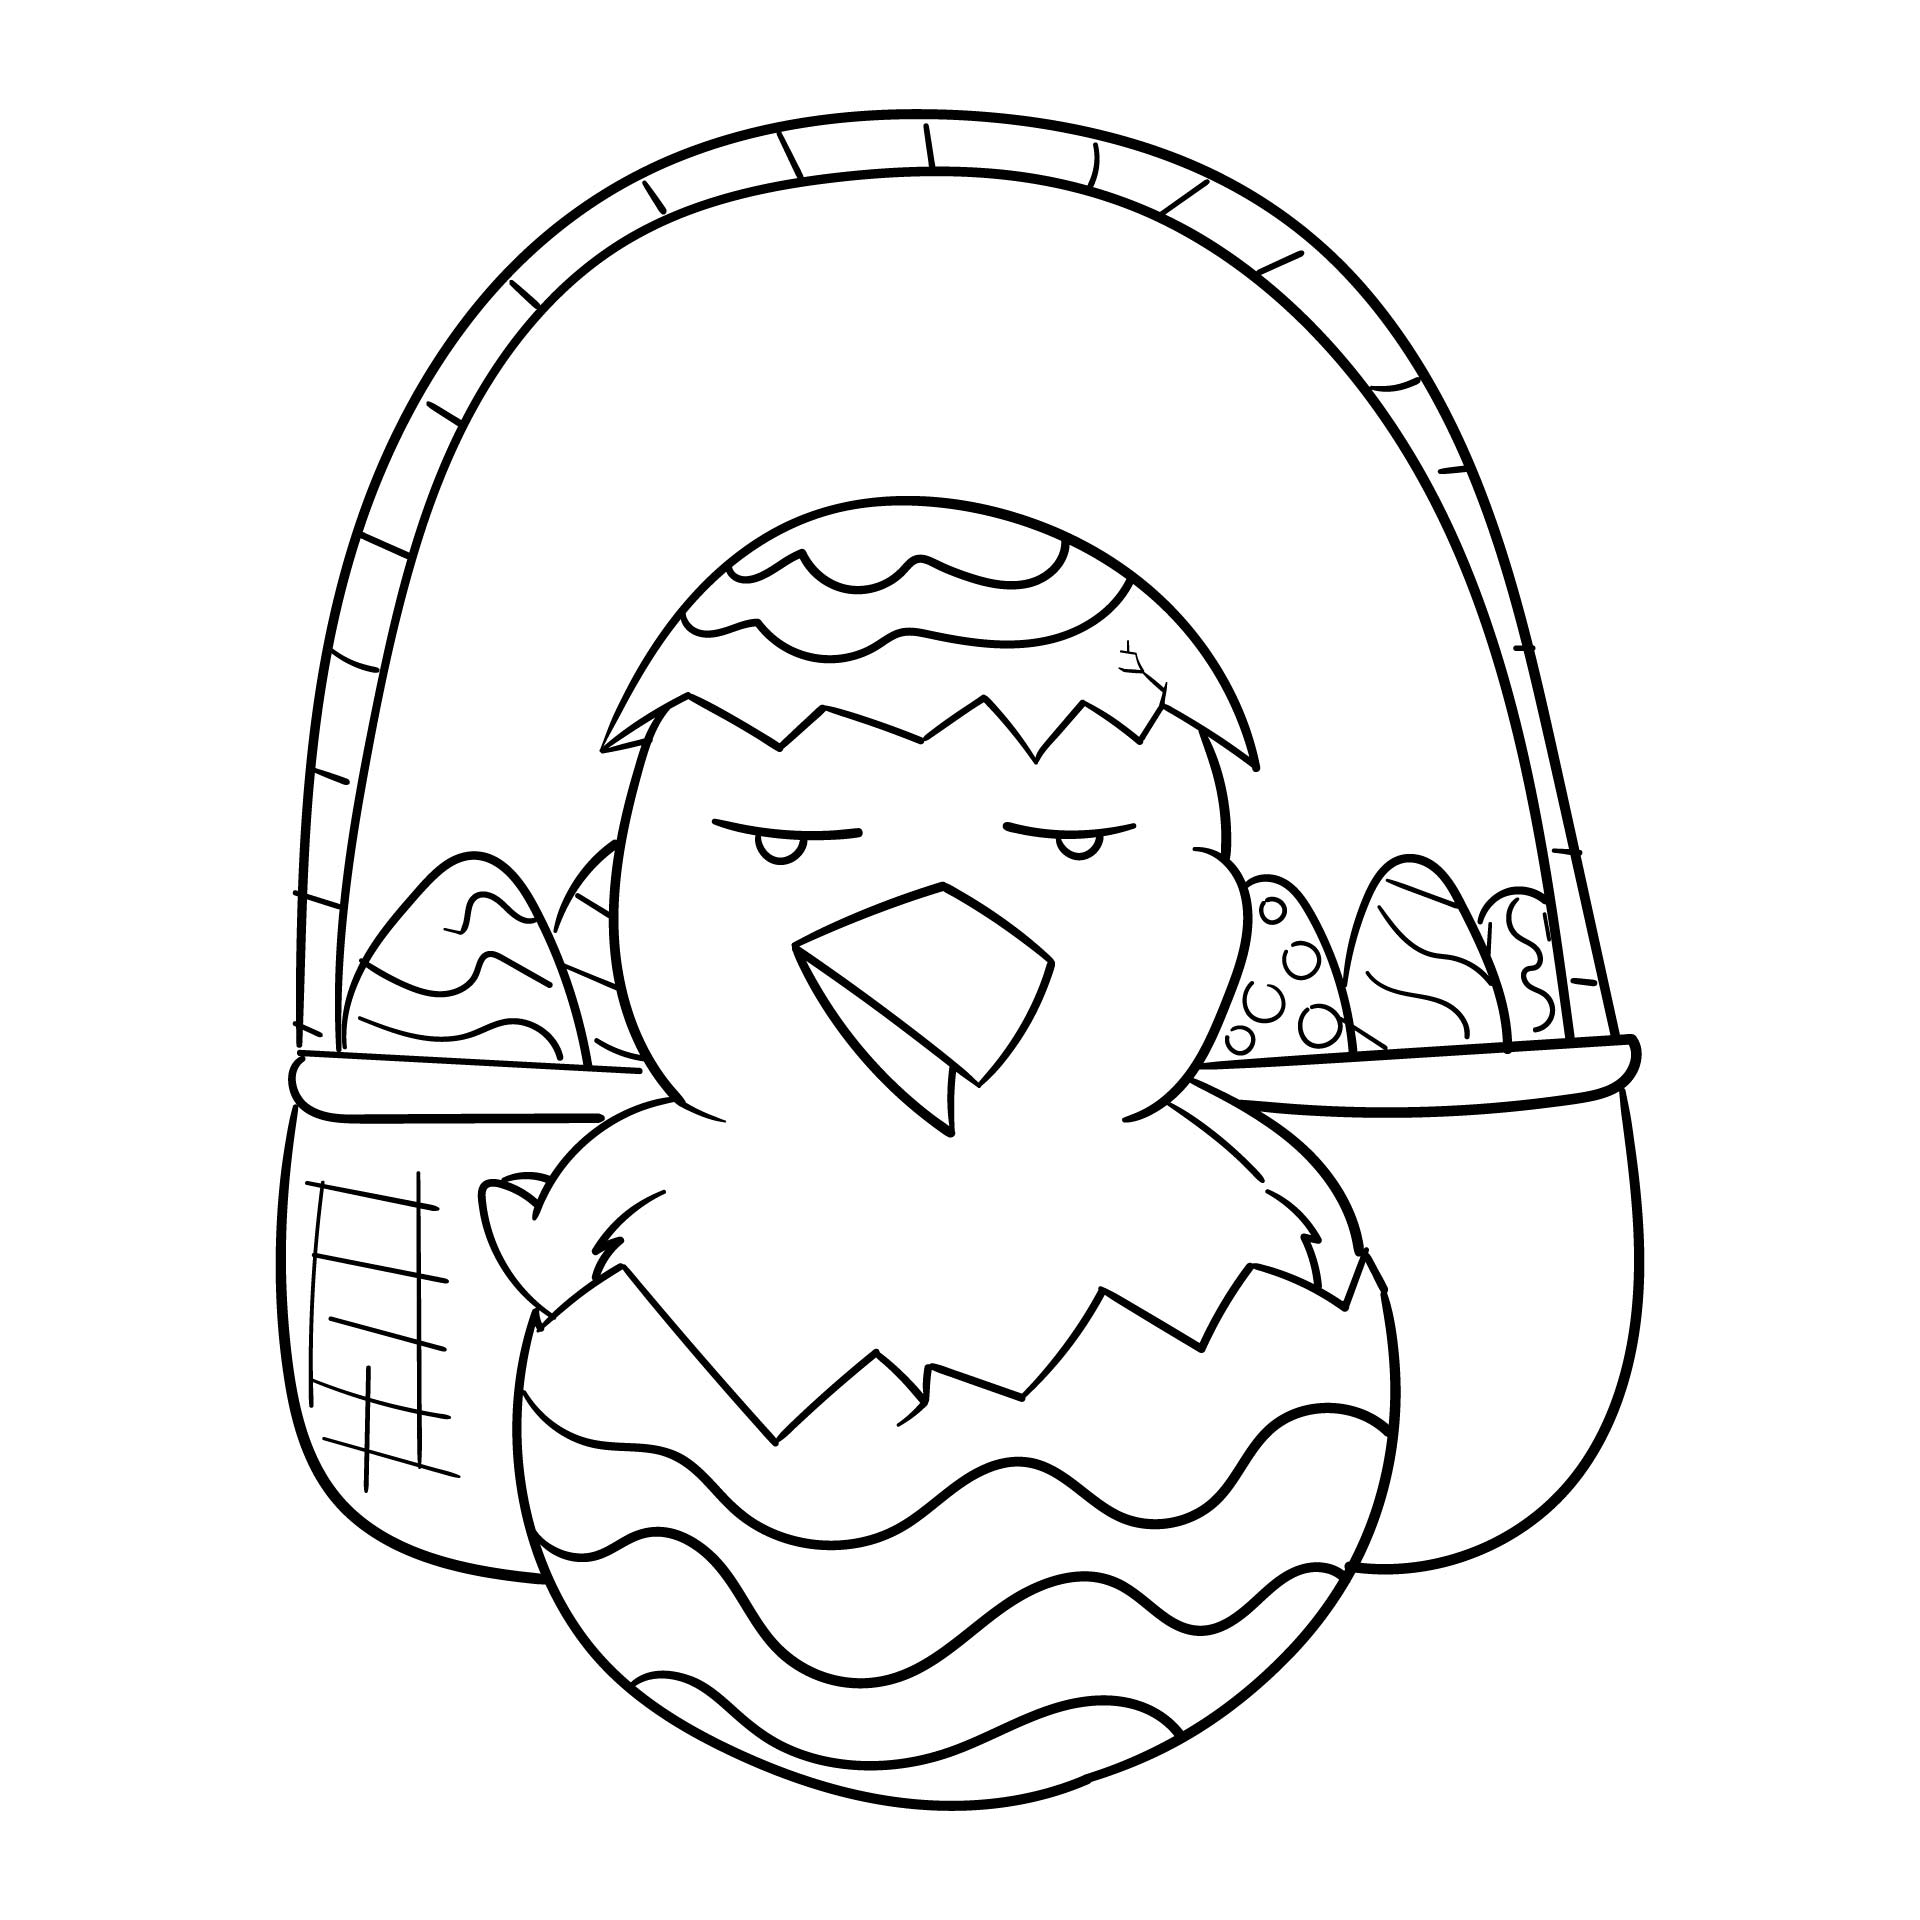 7-best-images-of-easter-chicks-outline-printable-chick-coloring-page